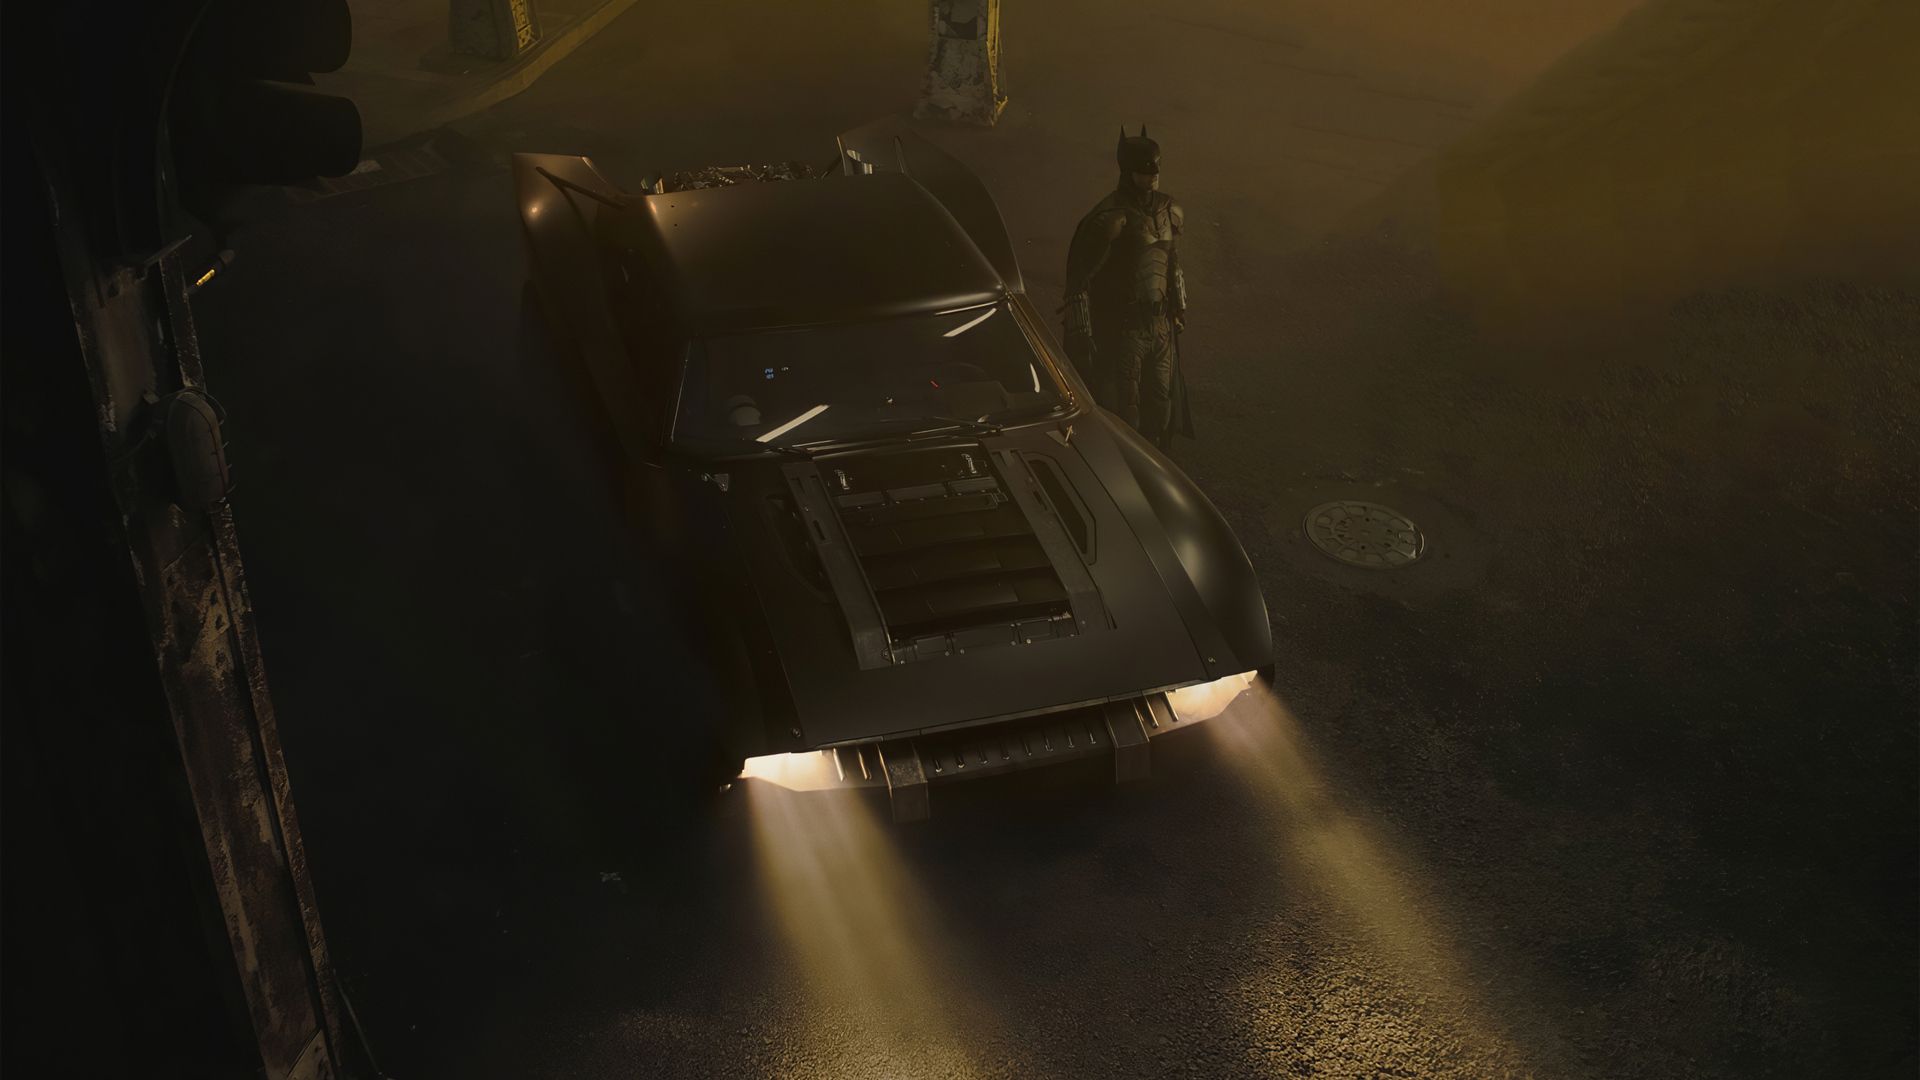 Batman 2021 Laptop Full HD 1080P HD 4k Wallpaper, Image, Background, Photo and Picture